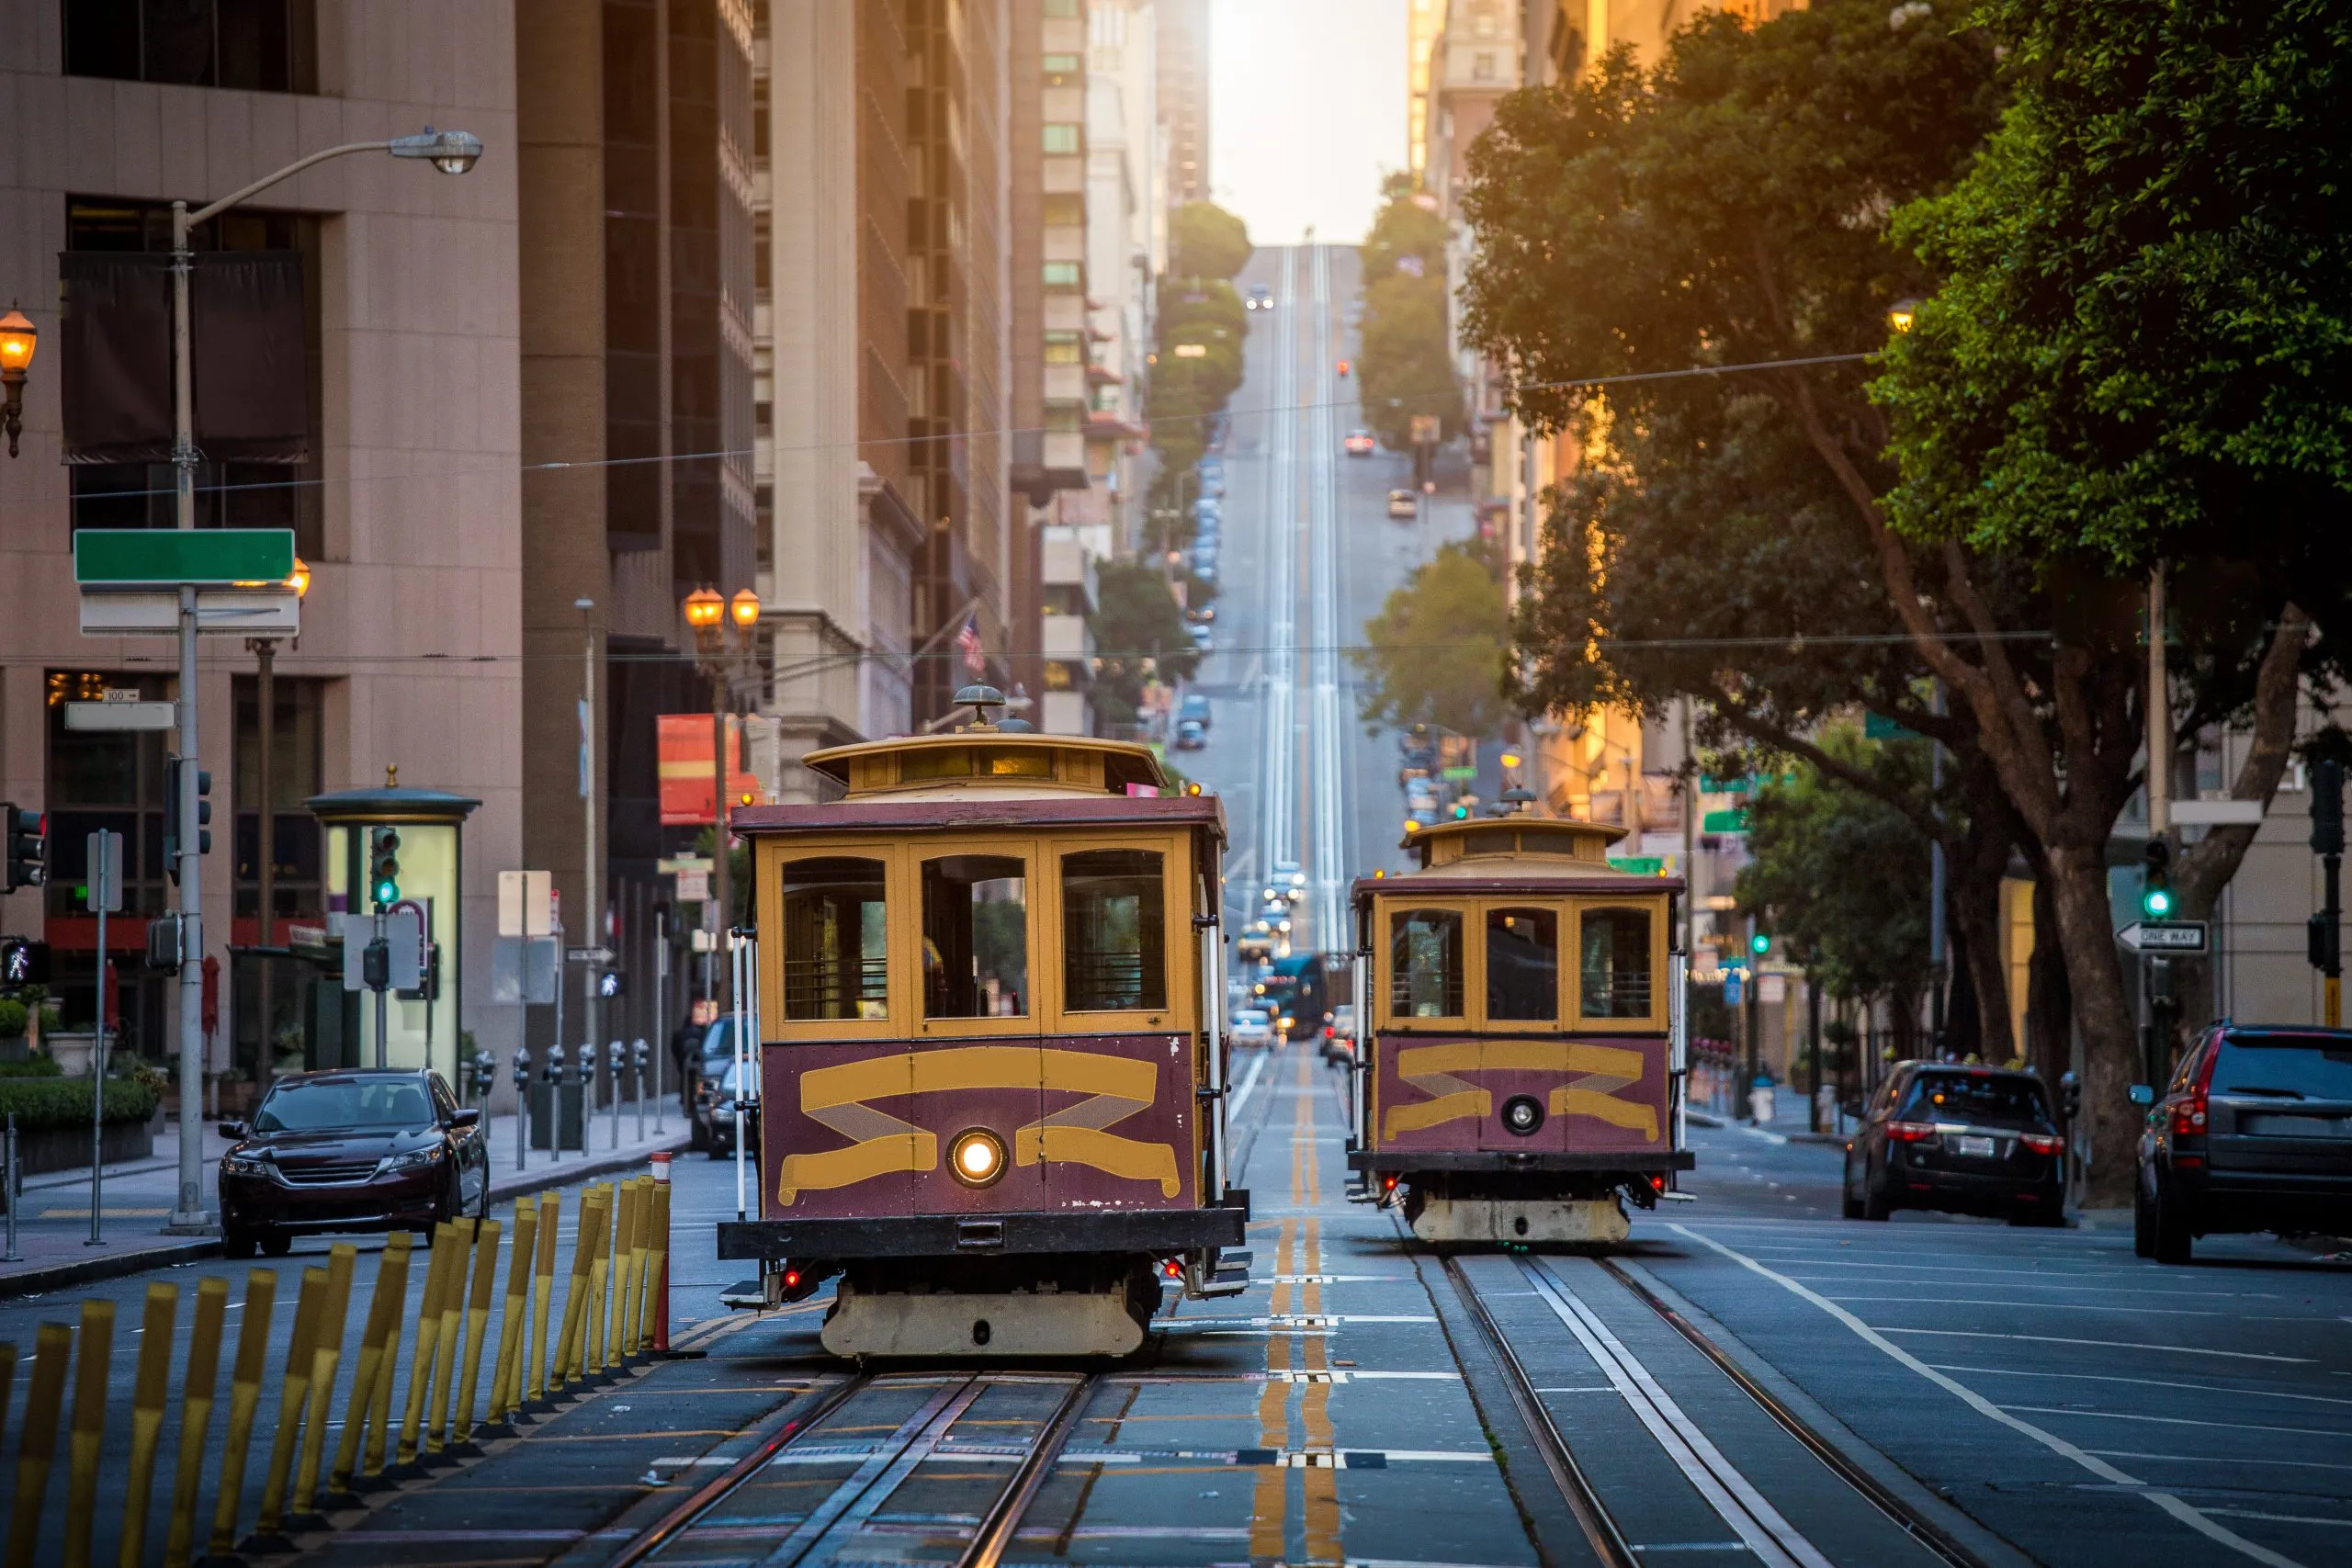 Ride the historic cable cars through cityscapes